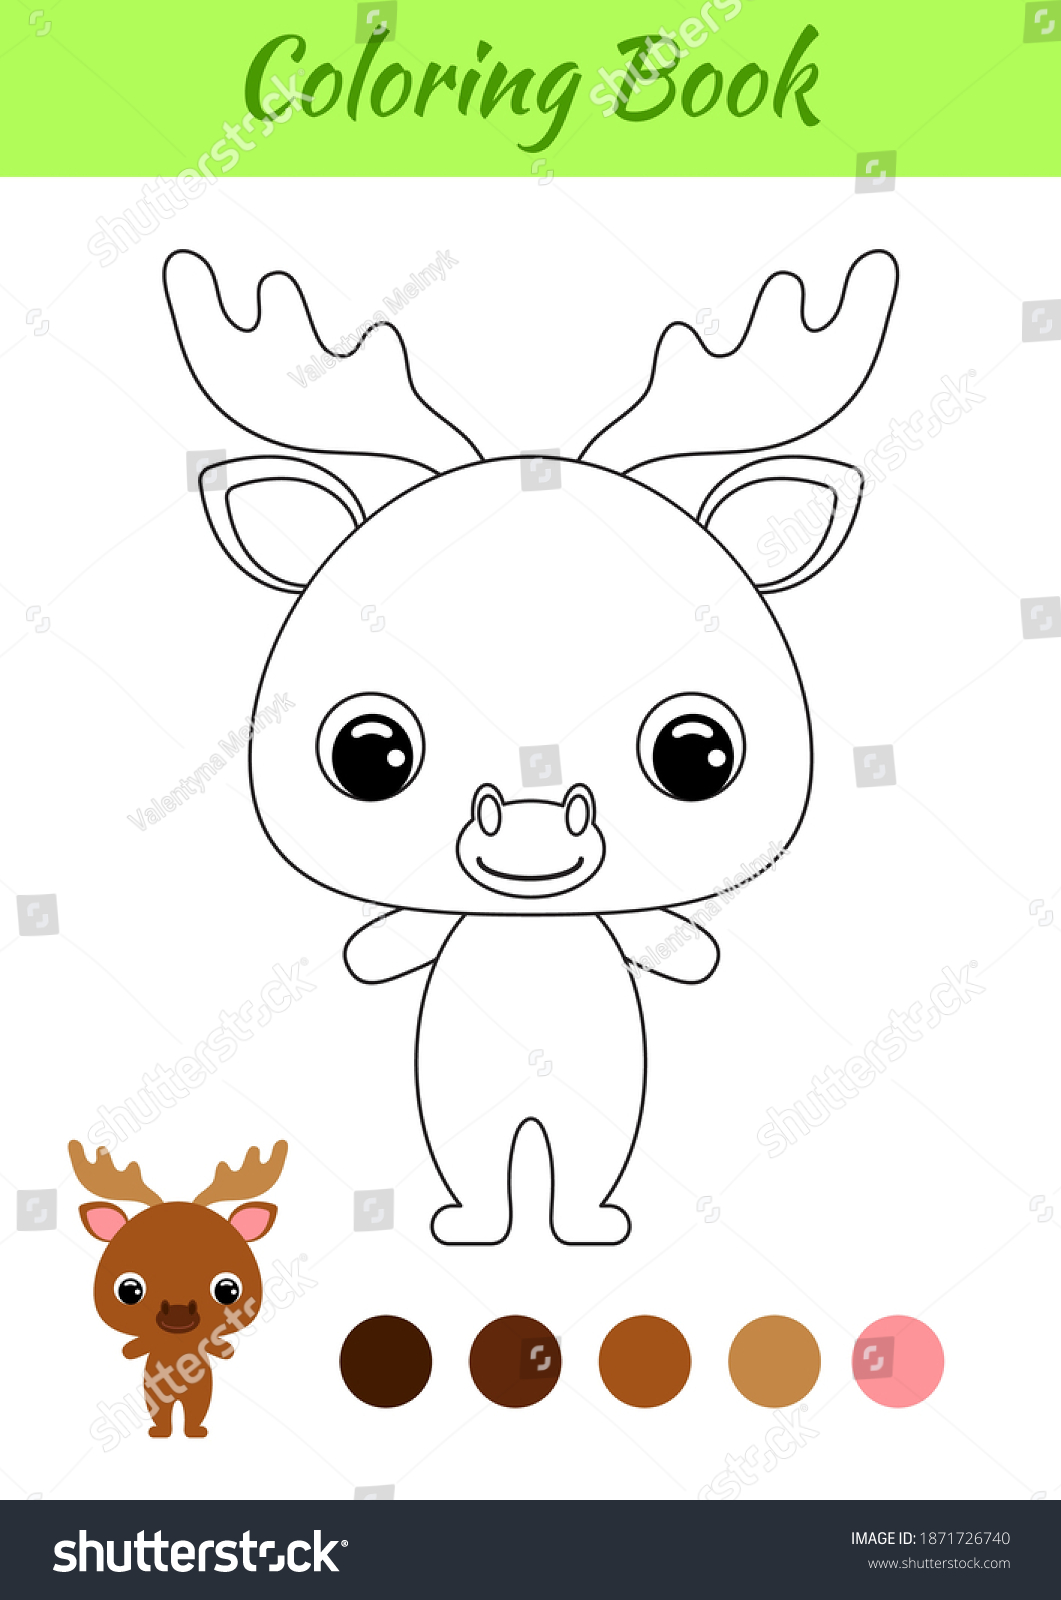 Coloring book little baby moose. Coloring page   Royalty Free ...